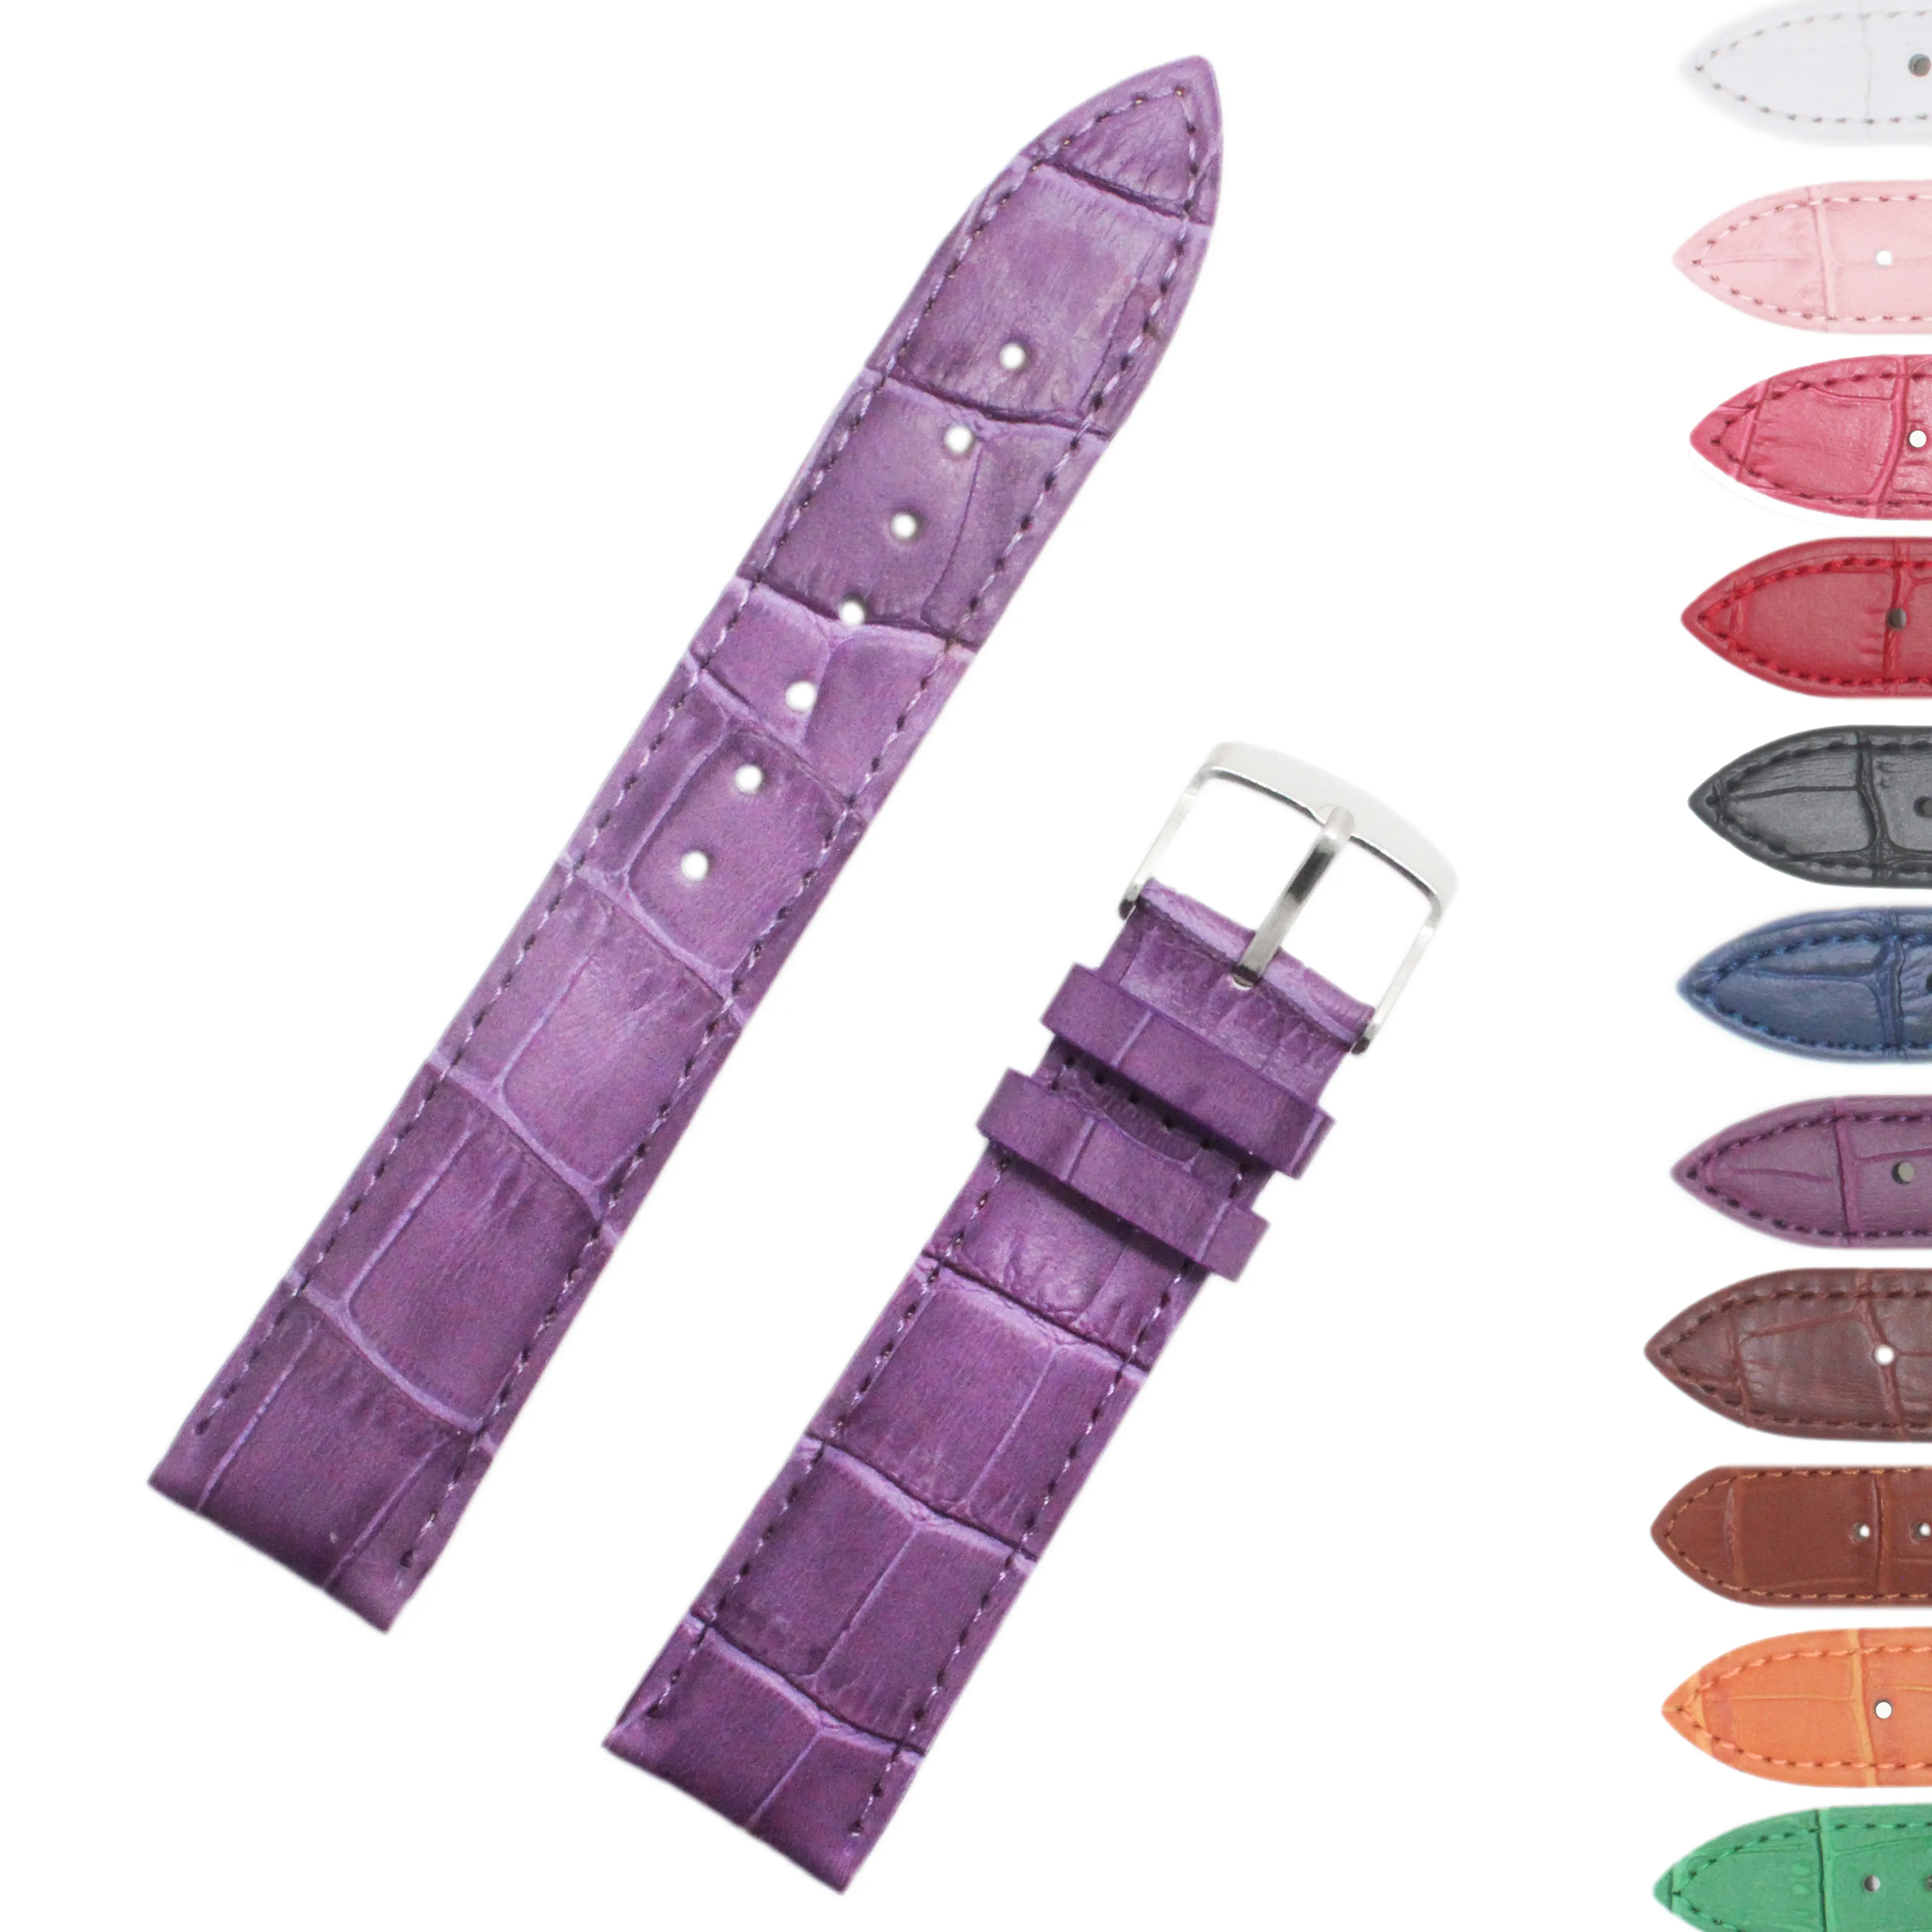 Factory directly bamboo Crocodile grain Cowhide genuine leather high quality watch straps band